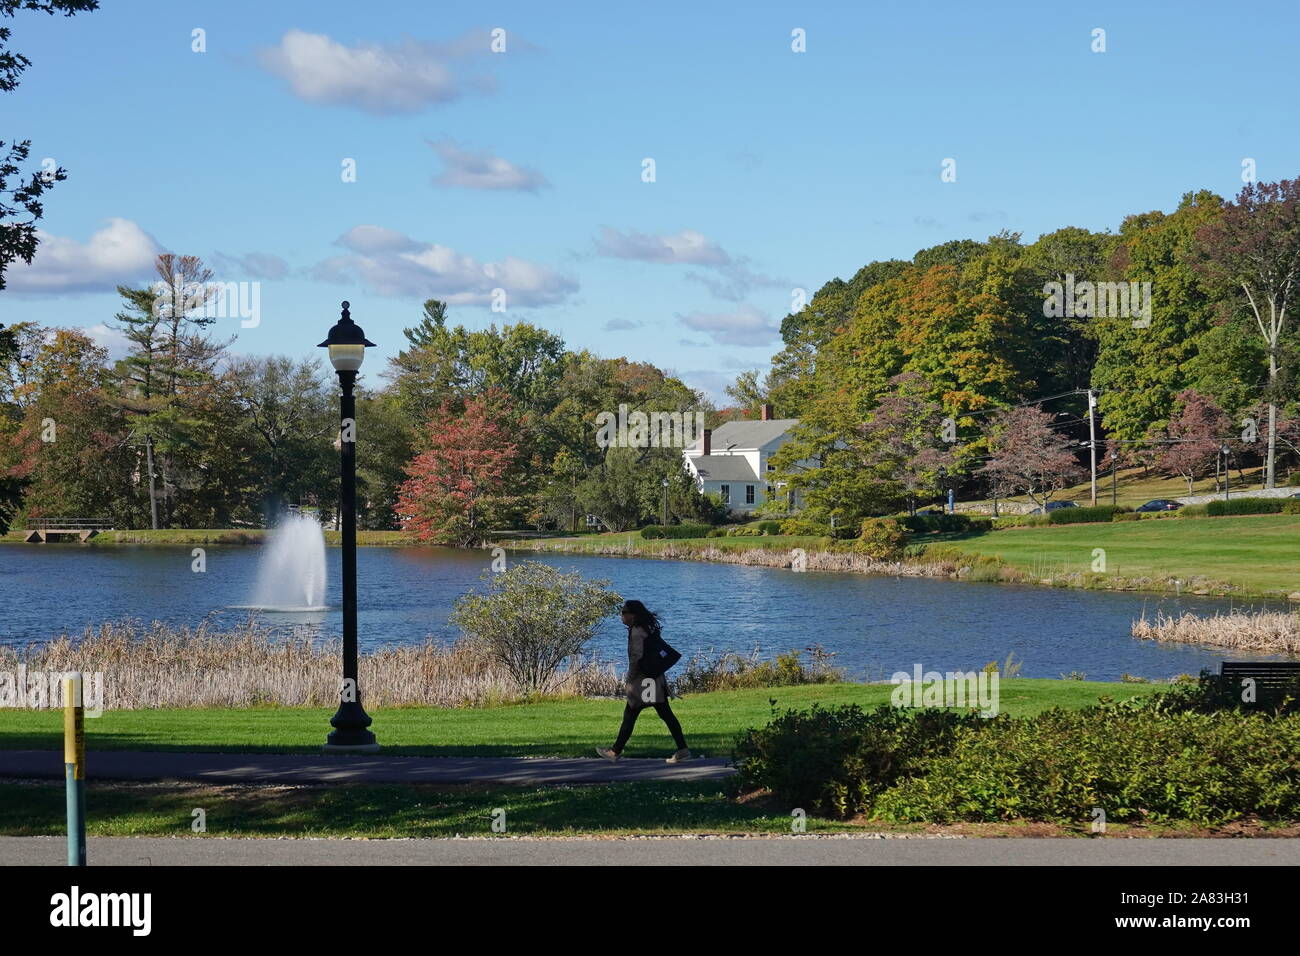 Storrs, CT / USA - October 4, 2019: Student walks on the sidewalk surrounding Mirror Lake on UCONN's campus Stock Photo